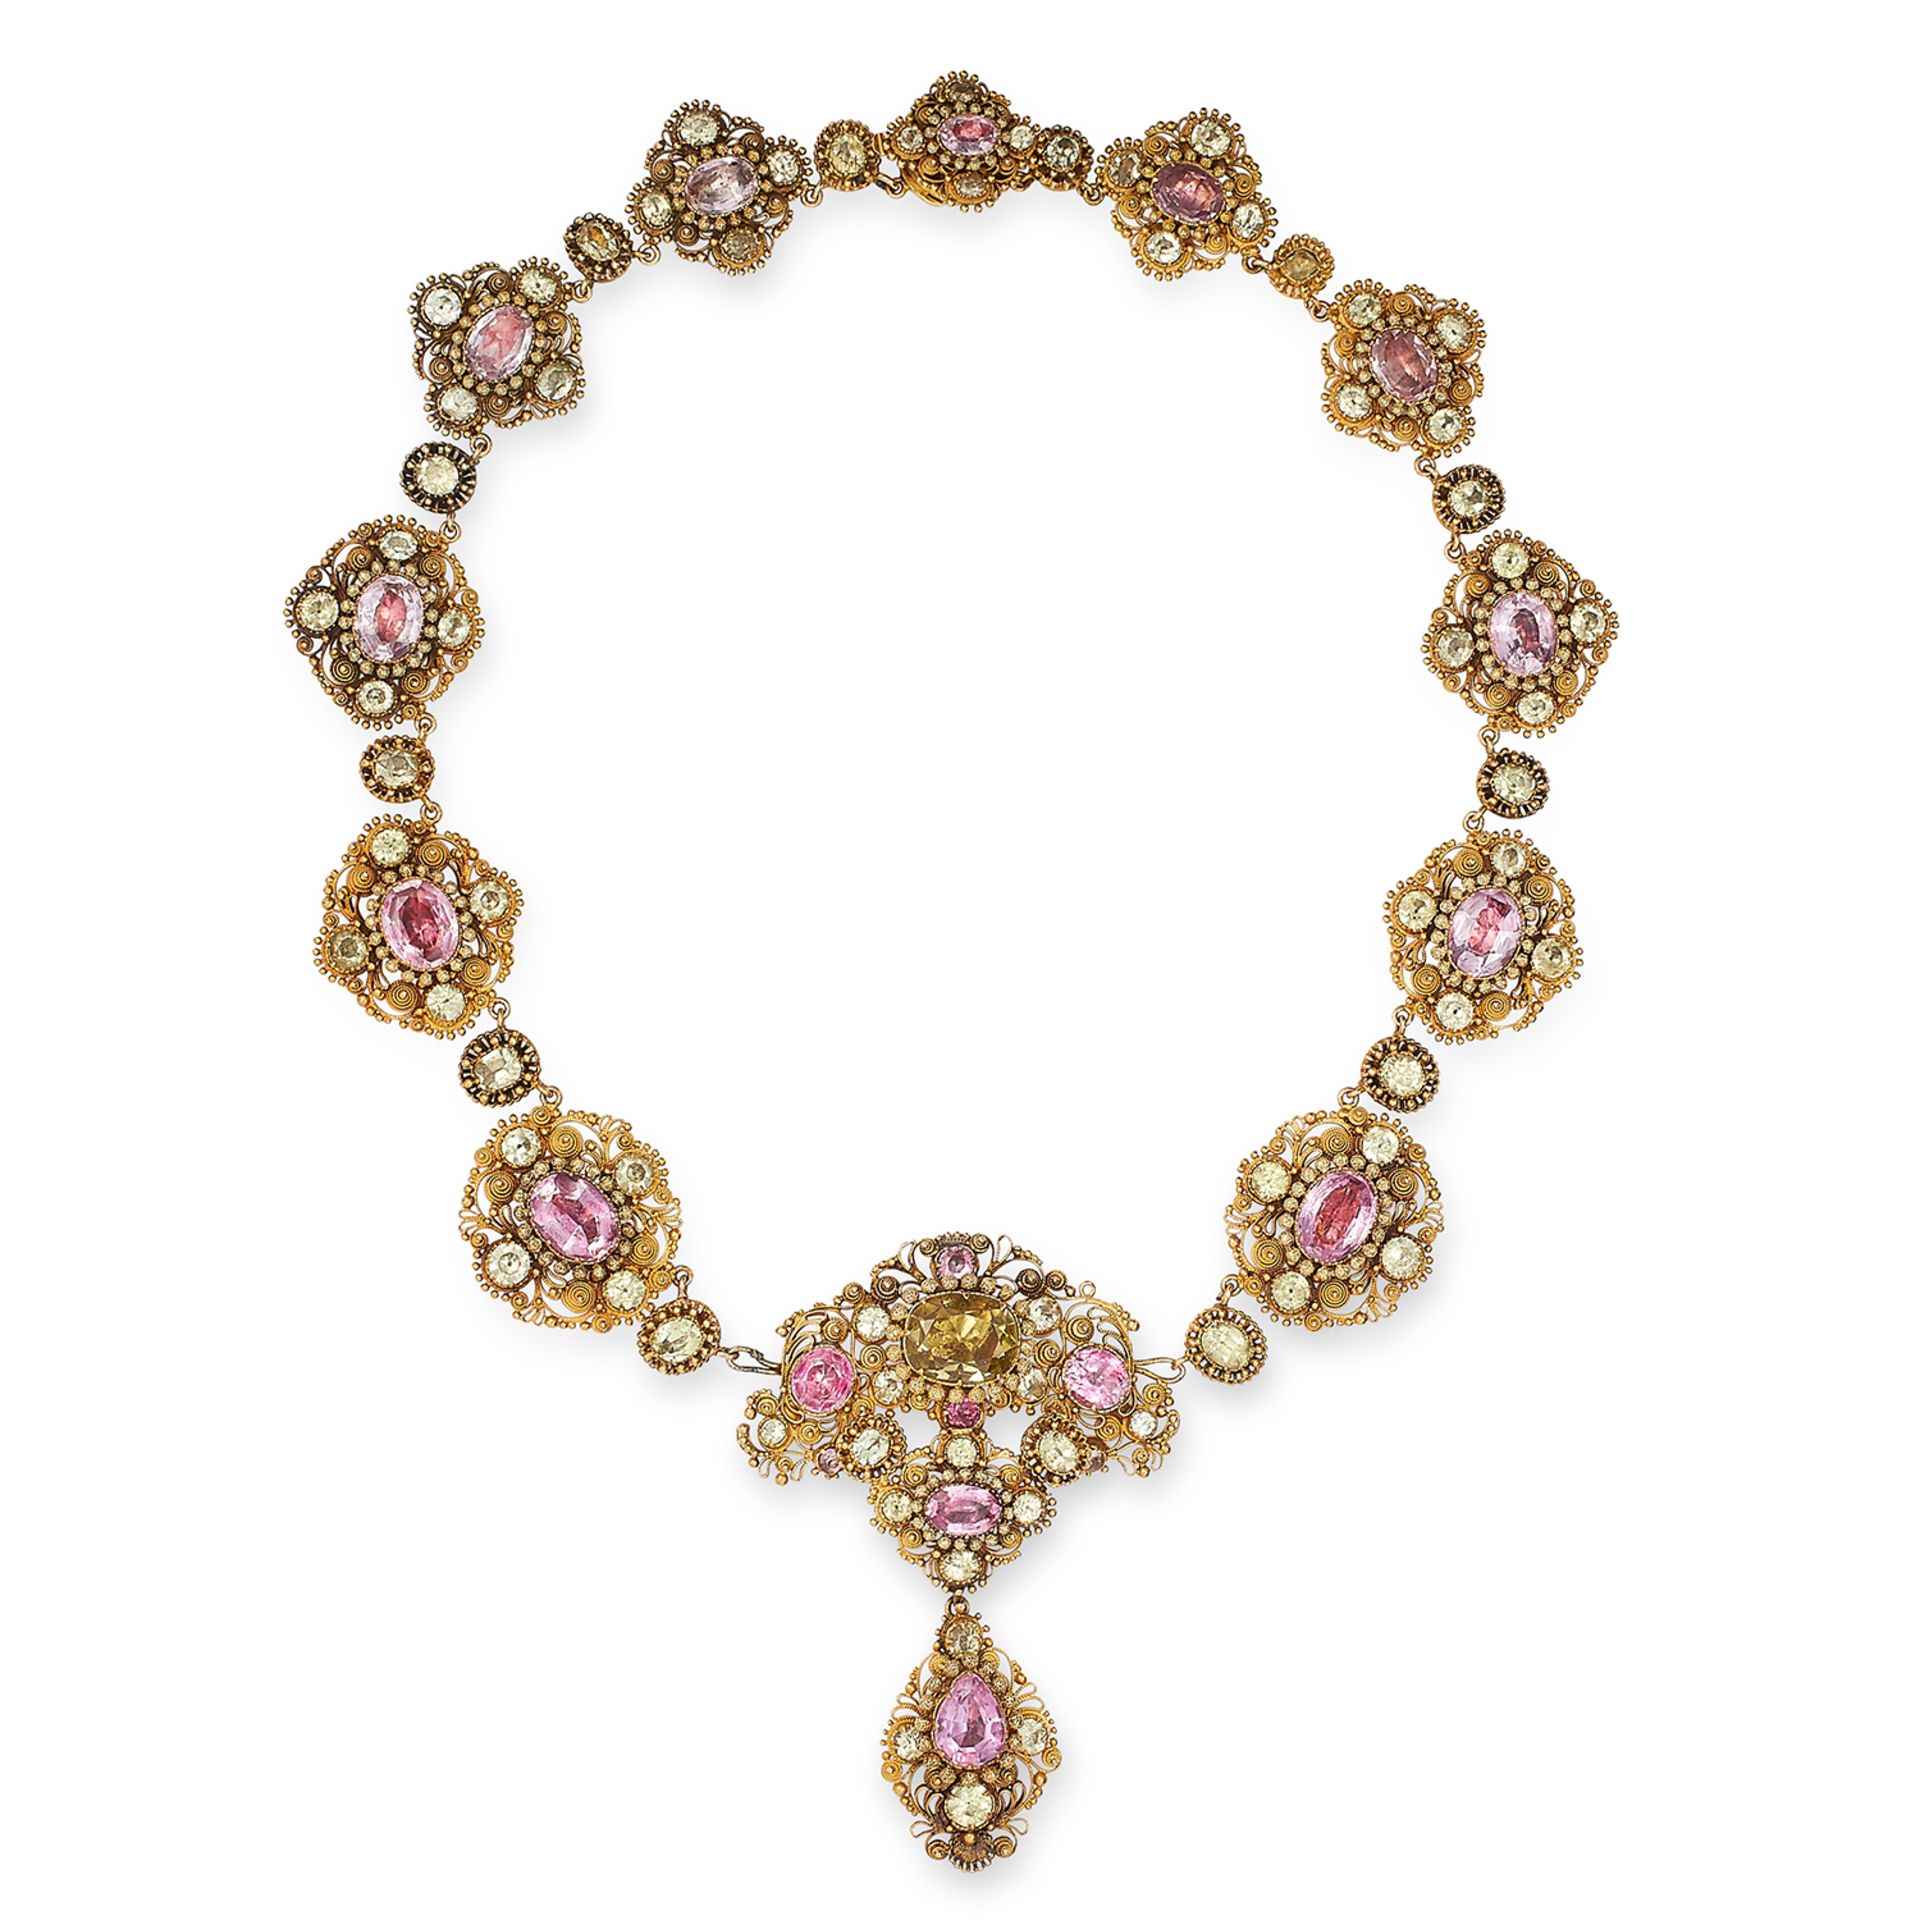 ANTIQUE GEORGIAN PINK TOPAZ AND CHRYSOBERYL NECKLACE, EARRING AND BROOCH DEMI PATURE set with round,